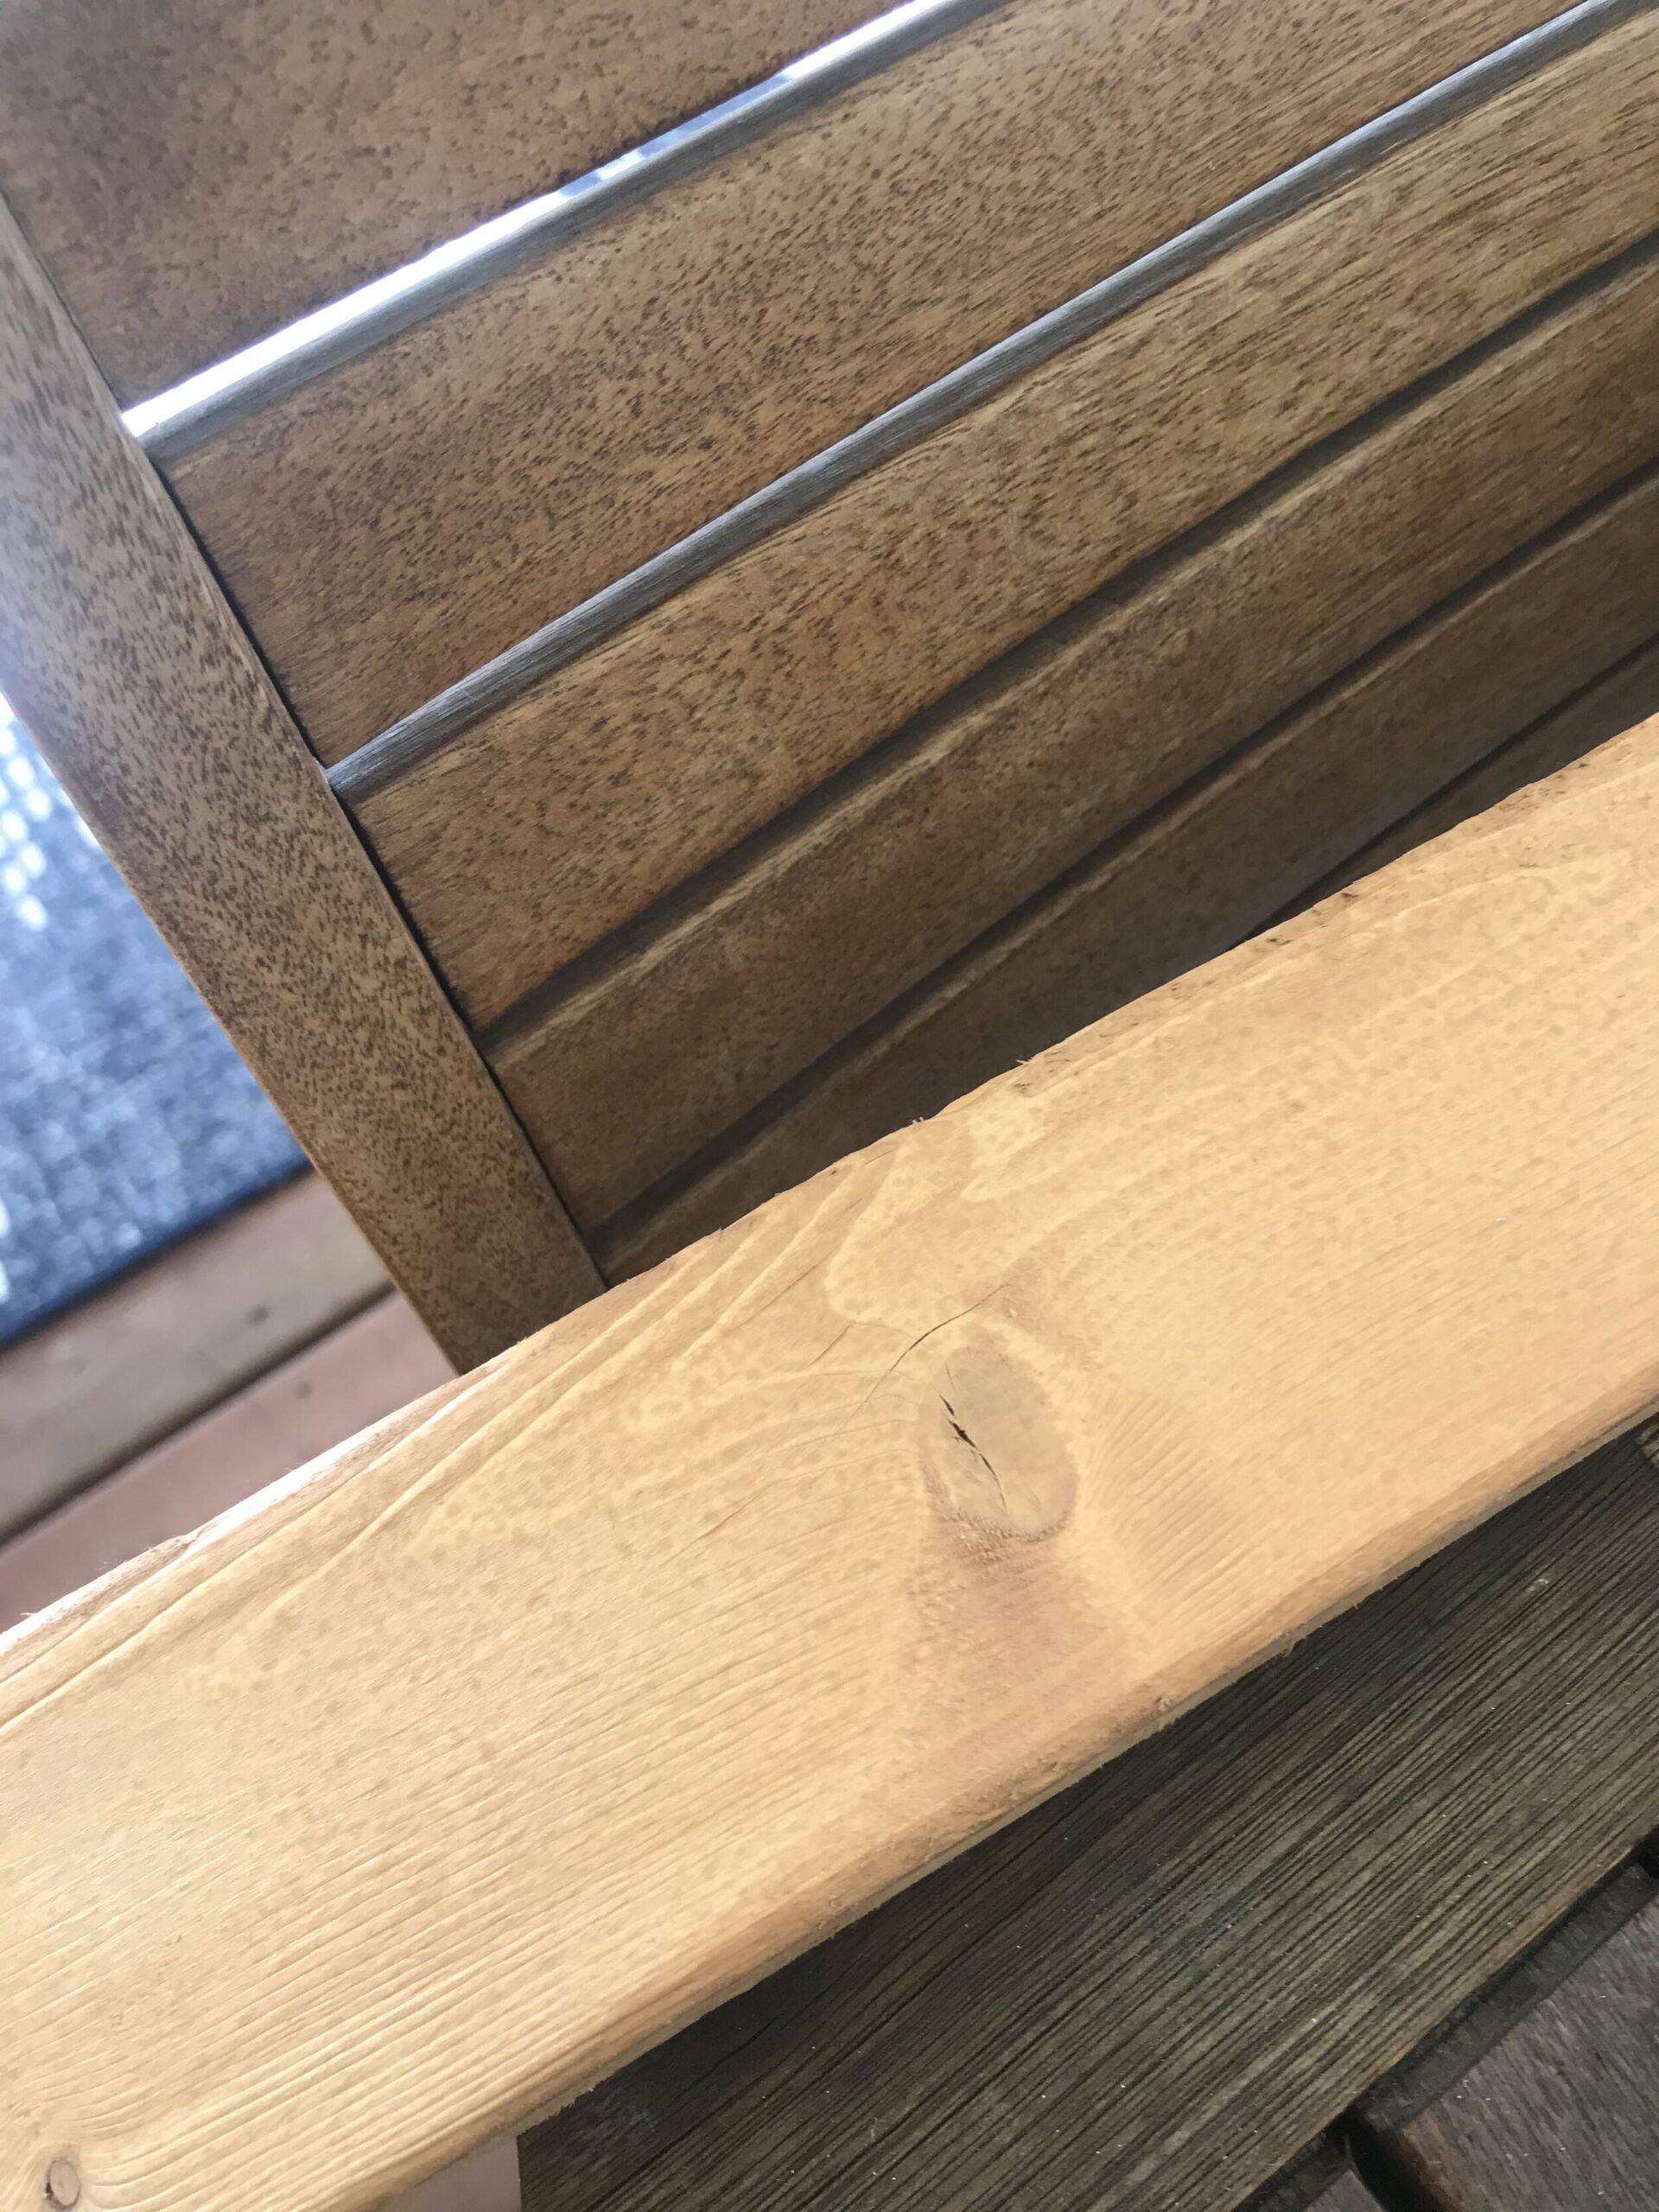 comparing a piece of wood to exsiting chair stain, not a good match